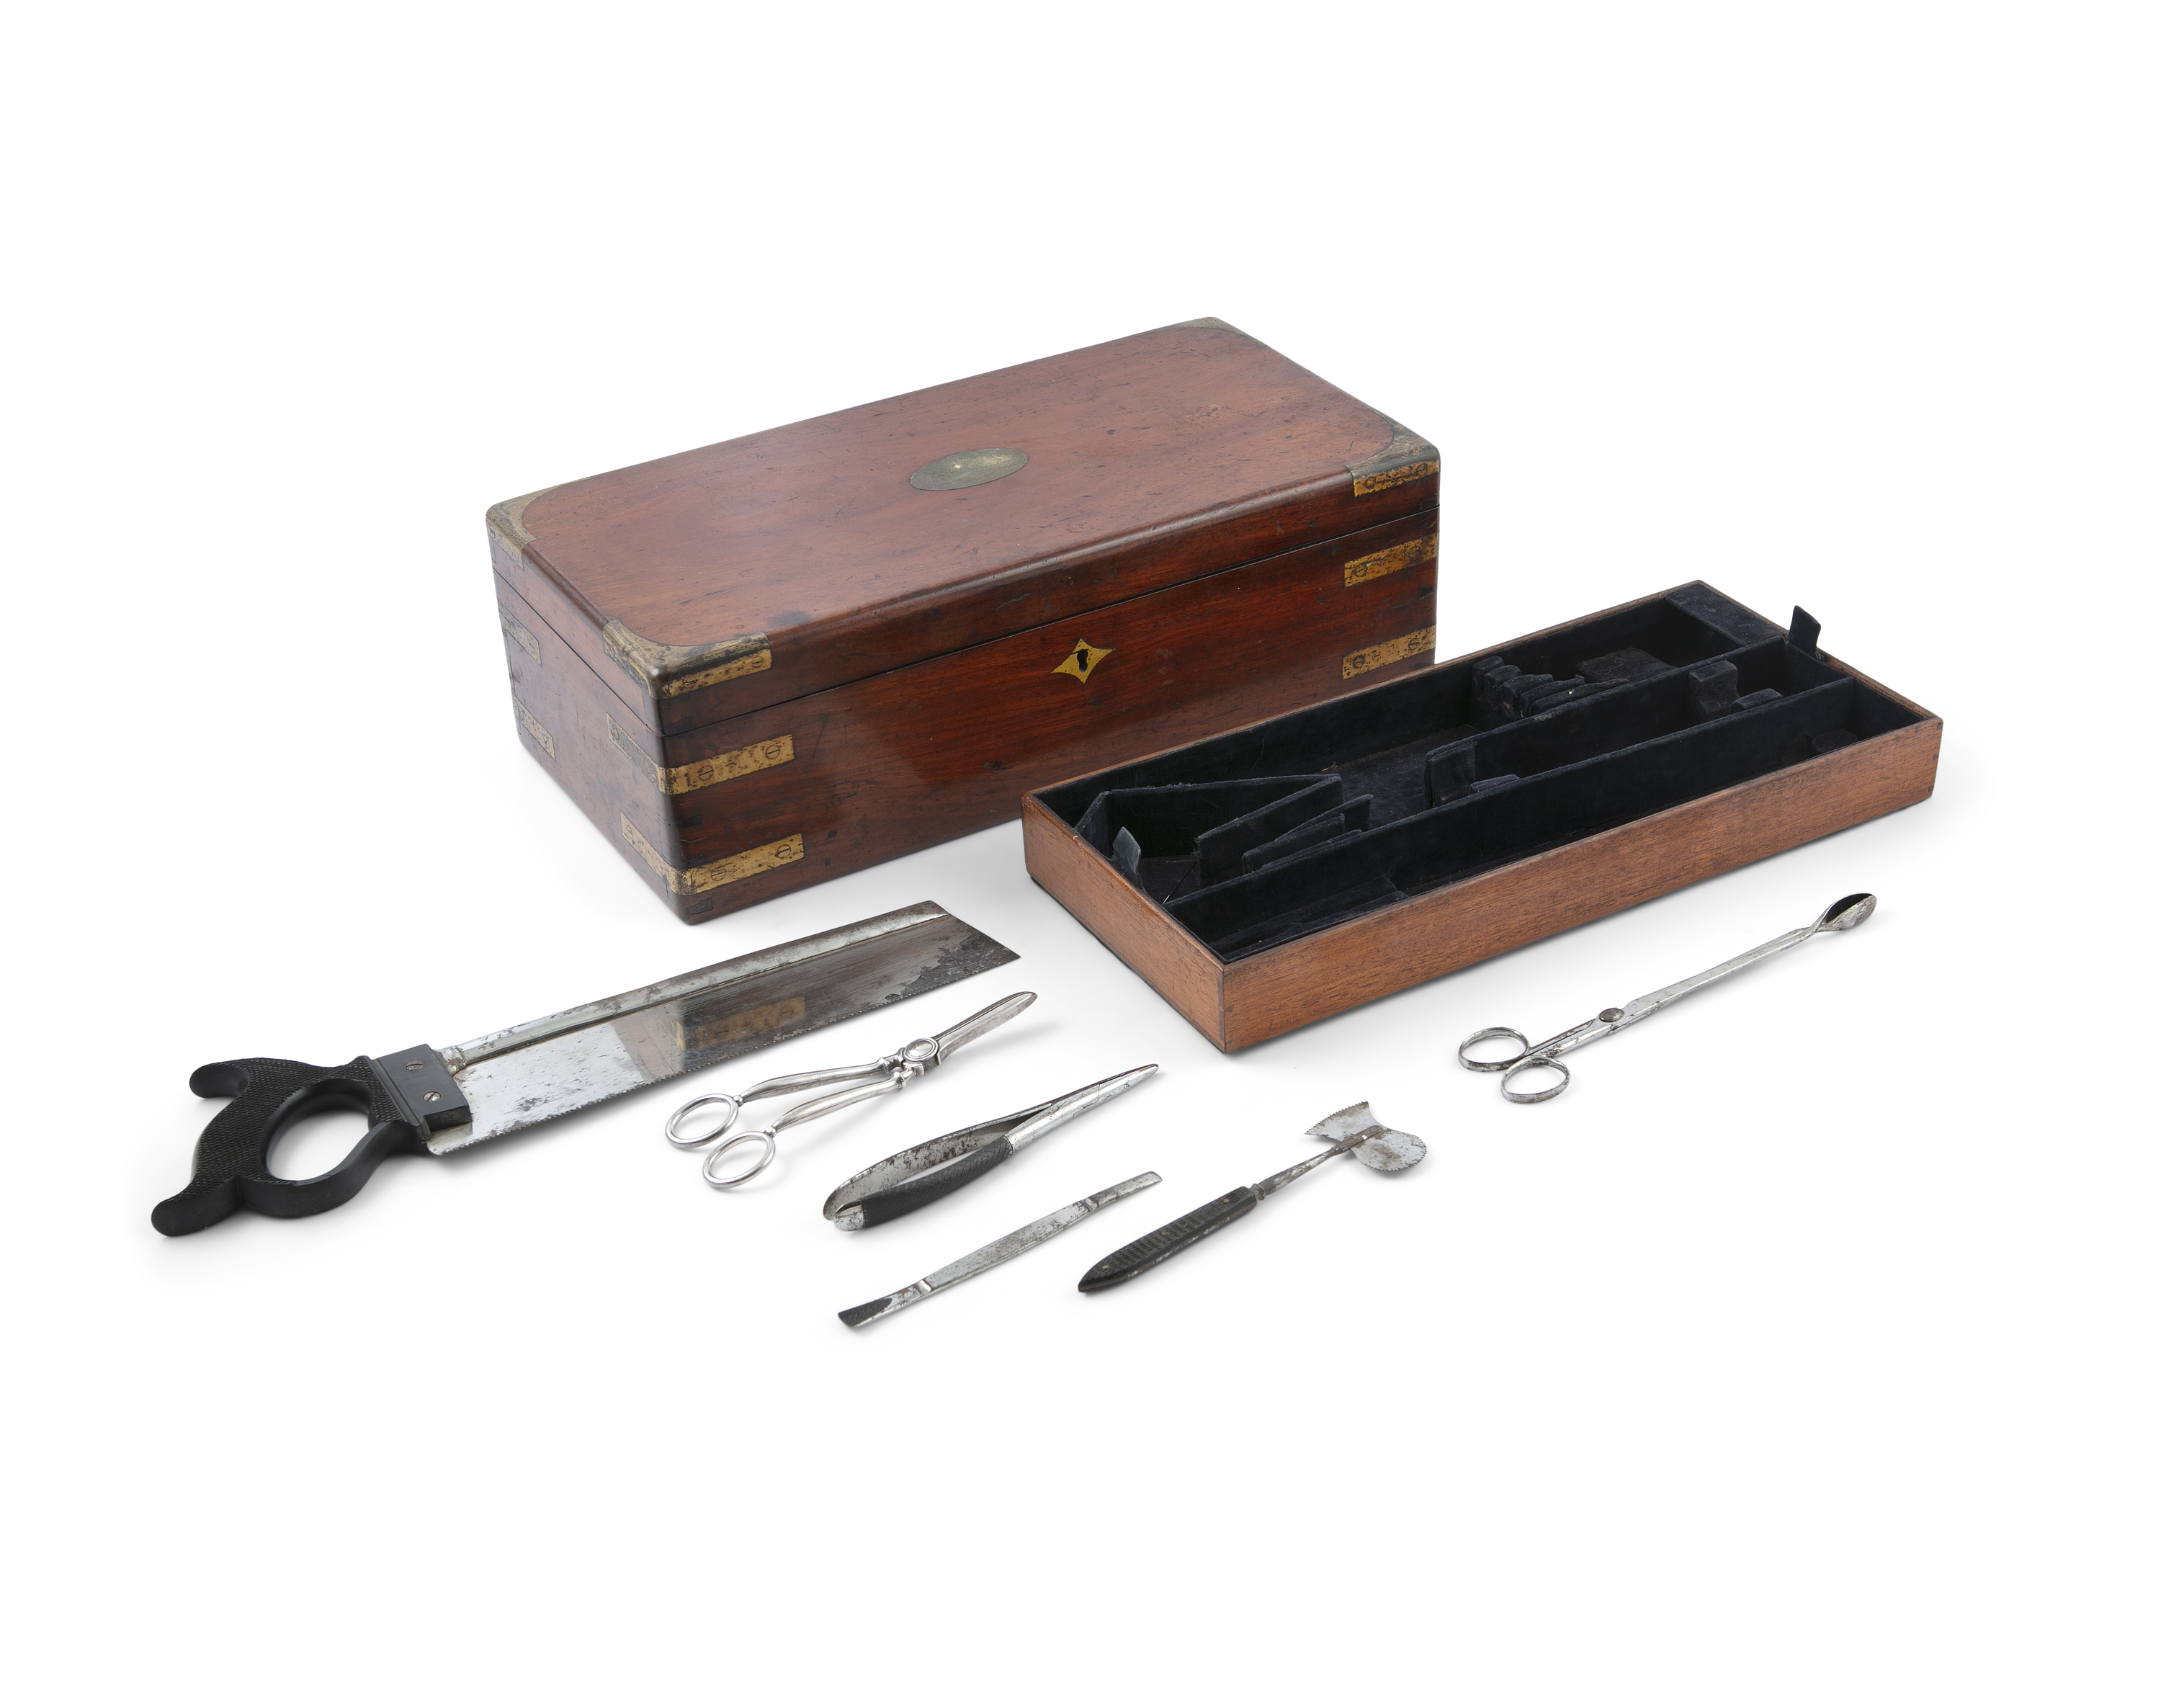 AN AMERICAN MAHOGANY AND BRASS BOUND SURGICAL BOX, 19th century, presented to Samuel Moore, M.D - Image 2 of 3